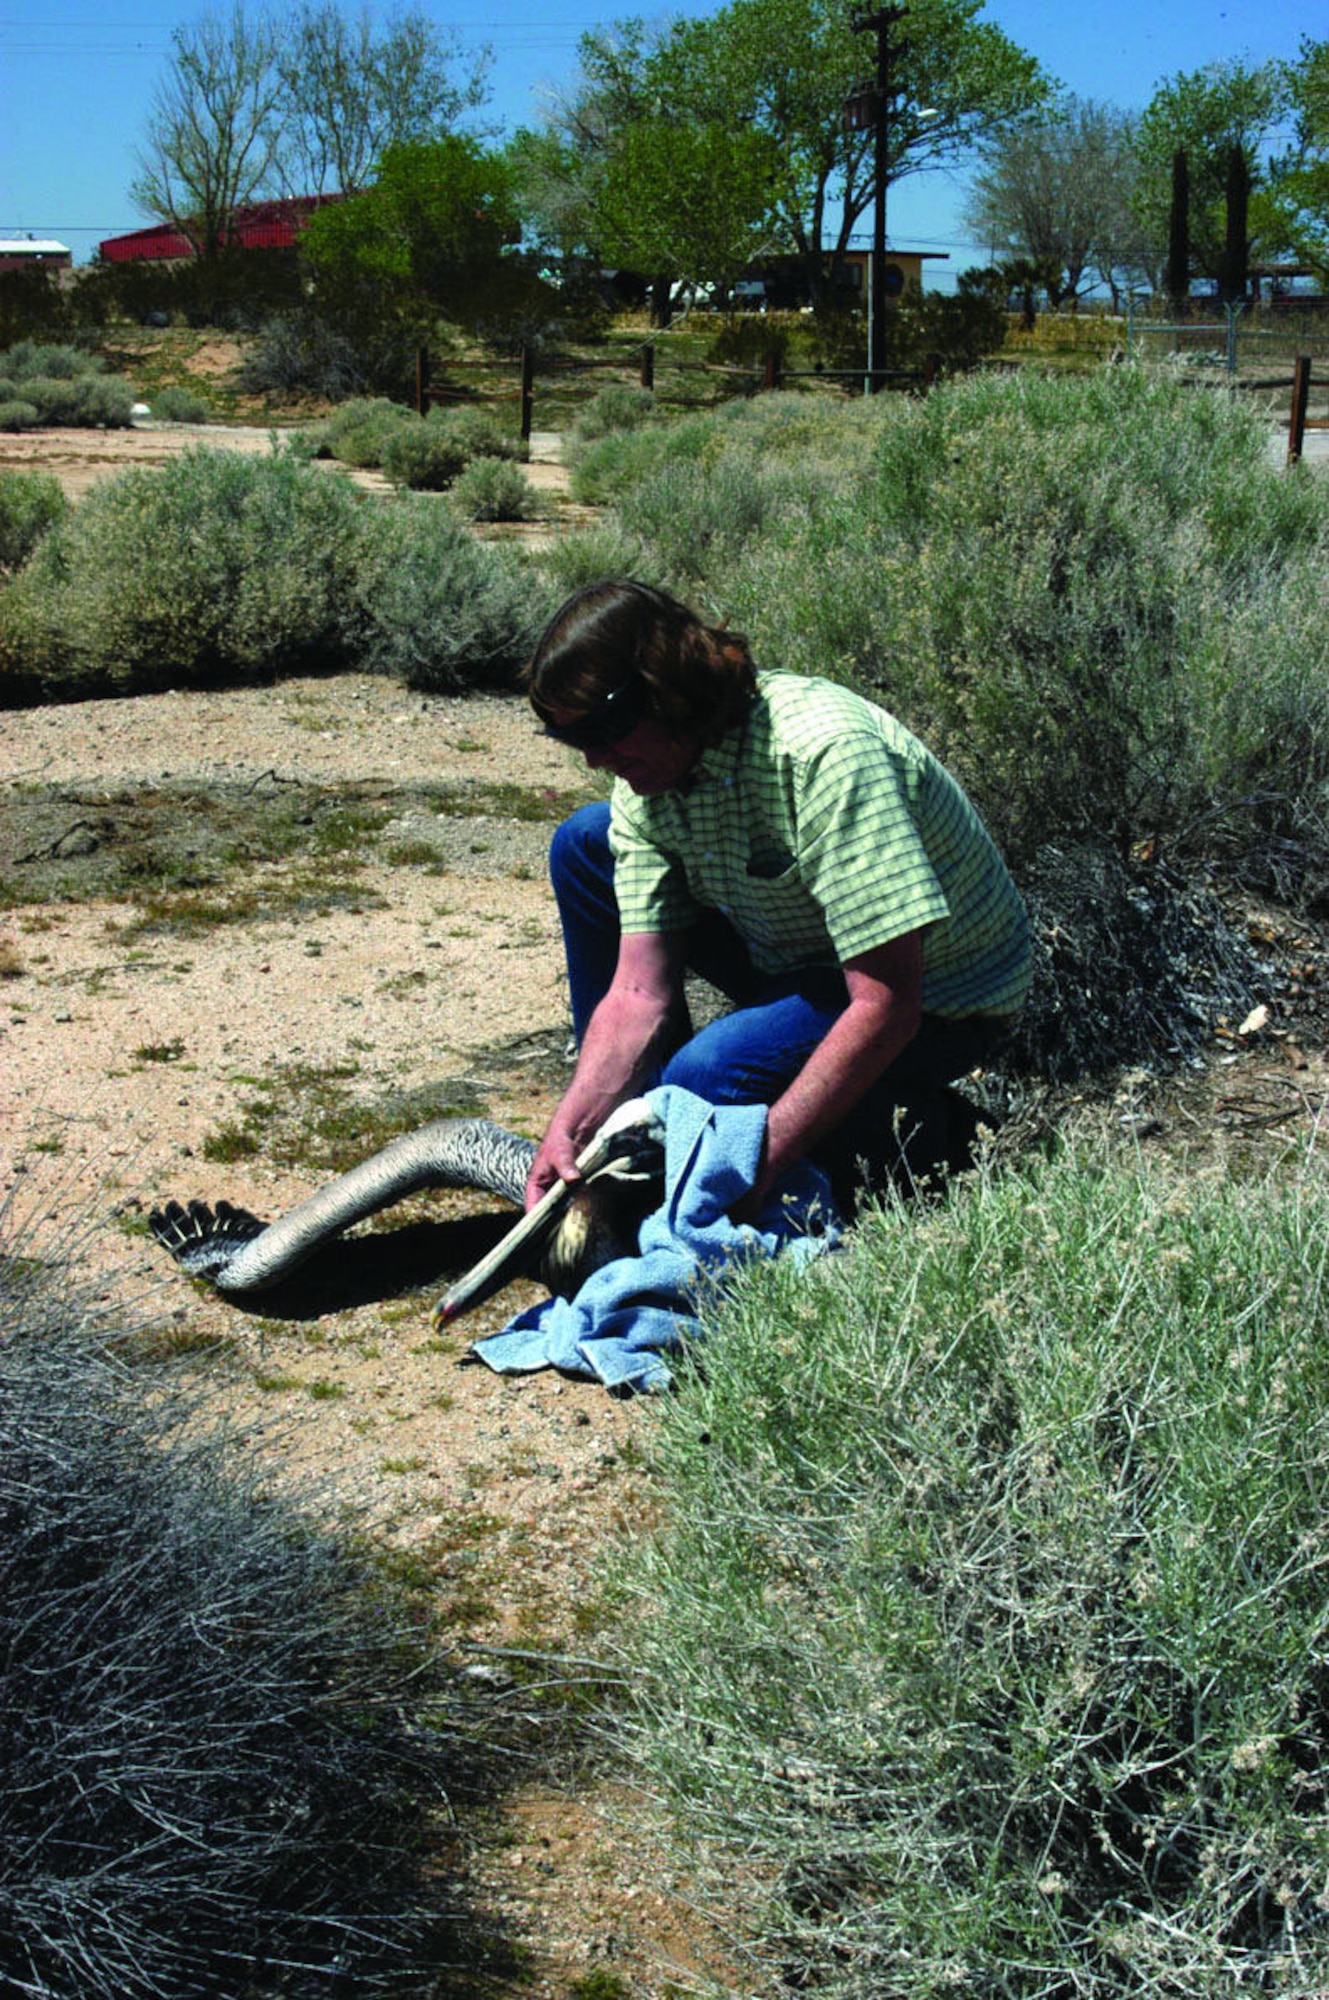 Mark Hagan, Edwards' Natural Resources manager, attends to an injured, rare brown pelican outside building 3502, April 12, 2006. The pelican was transported to the California Wildlife Center in Calabasas, Calif., for rehabilitation.  (Photo by Airman 1st Class Julius Delos Reyes)